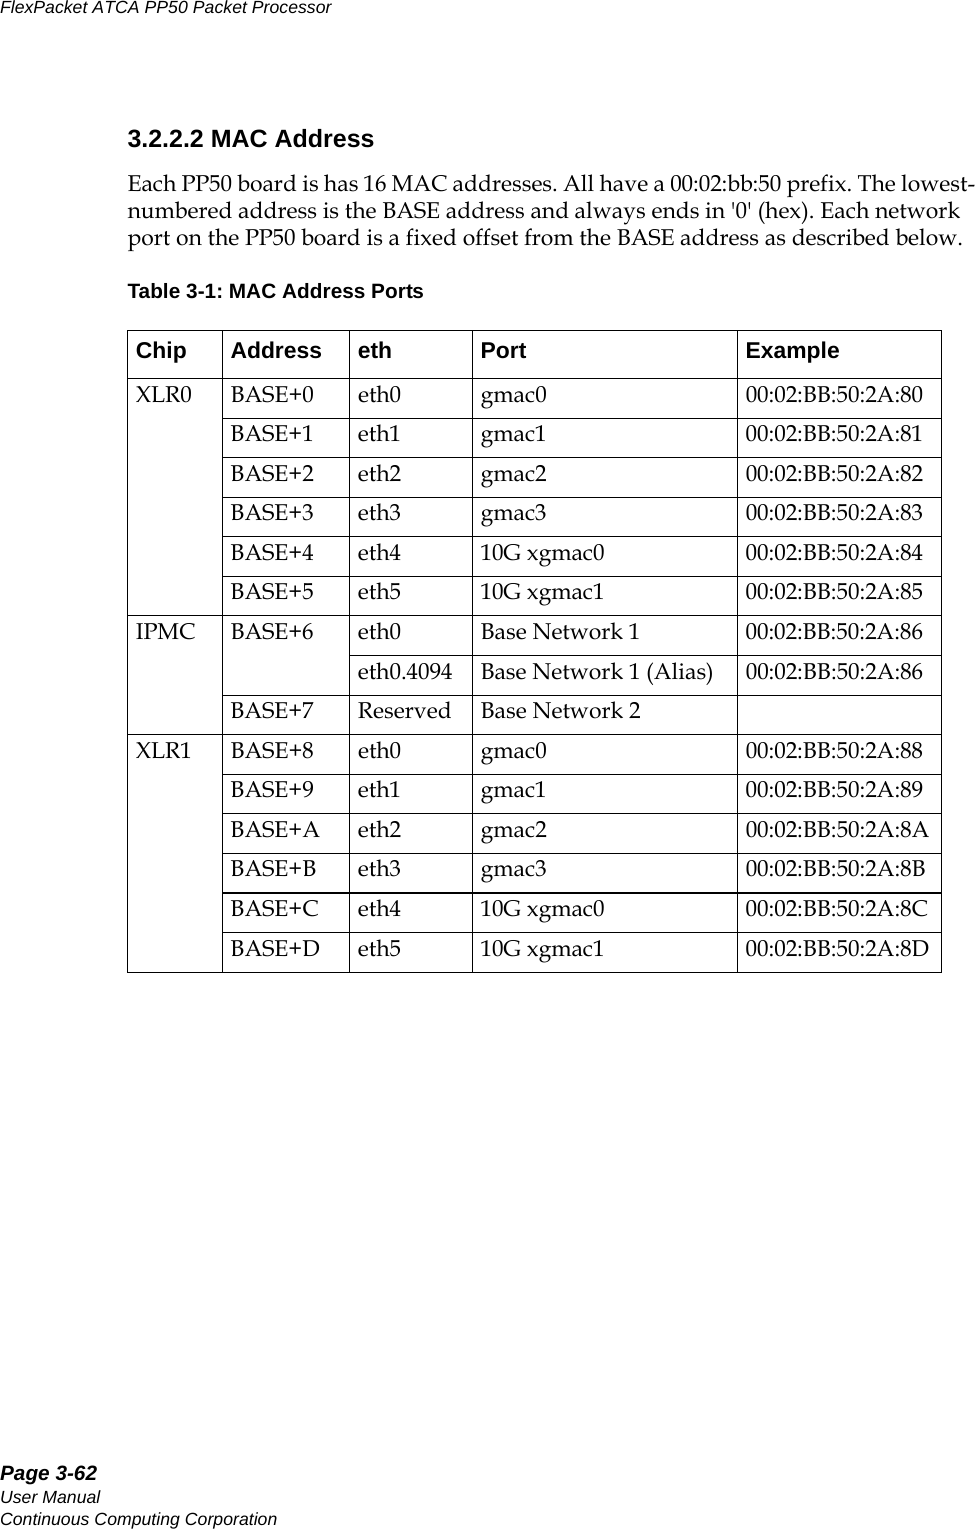 Page 3-62User ManualContinuous Computing CorporationFlexPacket ATCA PP50 Packet Processor     Preliminary3.2.2.2 MAC AddressEach PP50 board is has 16 MAC addresses. All have a 00:02:bb:50 prefix. The lowest-numbered address is the BASE address and always ends in &apos;0&apos; (hex). Each network port on the PP50 board is a fixed offset from the BASE address as described below.Table 3-1: MAC Address PortsChip Address eth Port ExampleXLR0 BASE+0 eth0 gmac0 00:02:BB:50:2A:80BASE+1 eth1 gmac1 00:02:BB:50:2A:81BASE+2 eth2 gmac2 00:02:BB:50:2A:82BASE+3 eth3 gmac3 00:02:BB:50:2A:83BASE+4 eth4 10G xgmac0  00:02:BB:50:2A:84BASE+5 eth5 10G xgmac1  00:02:BB:50:2A:85IPMC BASE+6 eth0 Base Network 1  00:02:BB:50:2A:86eth0.4094 Base Network 1 (Alias) 00:02:BB:50:2A:86BASE+7  Reserved Base Network 2XLR1 BASE+8 eth0 gmac0 00:02:BB:50:2A:88BASE+9 eth1 gmac1 00:02:BB:50:2A:89BASE+A eth2 gmac2 00:02:BB:50:2A:8ABASE+B eth3 gmac3 00:02:BB:50:2A:8BBASE+C eth4 10G xgmac0  00:02:BB:50:2A:8CBASE+D eth5 10G xgmac1  00:02:BB:50:2A:8D